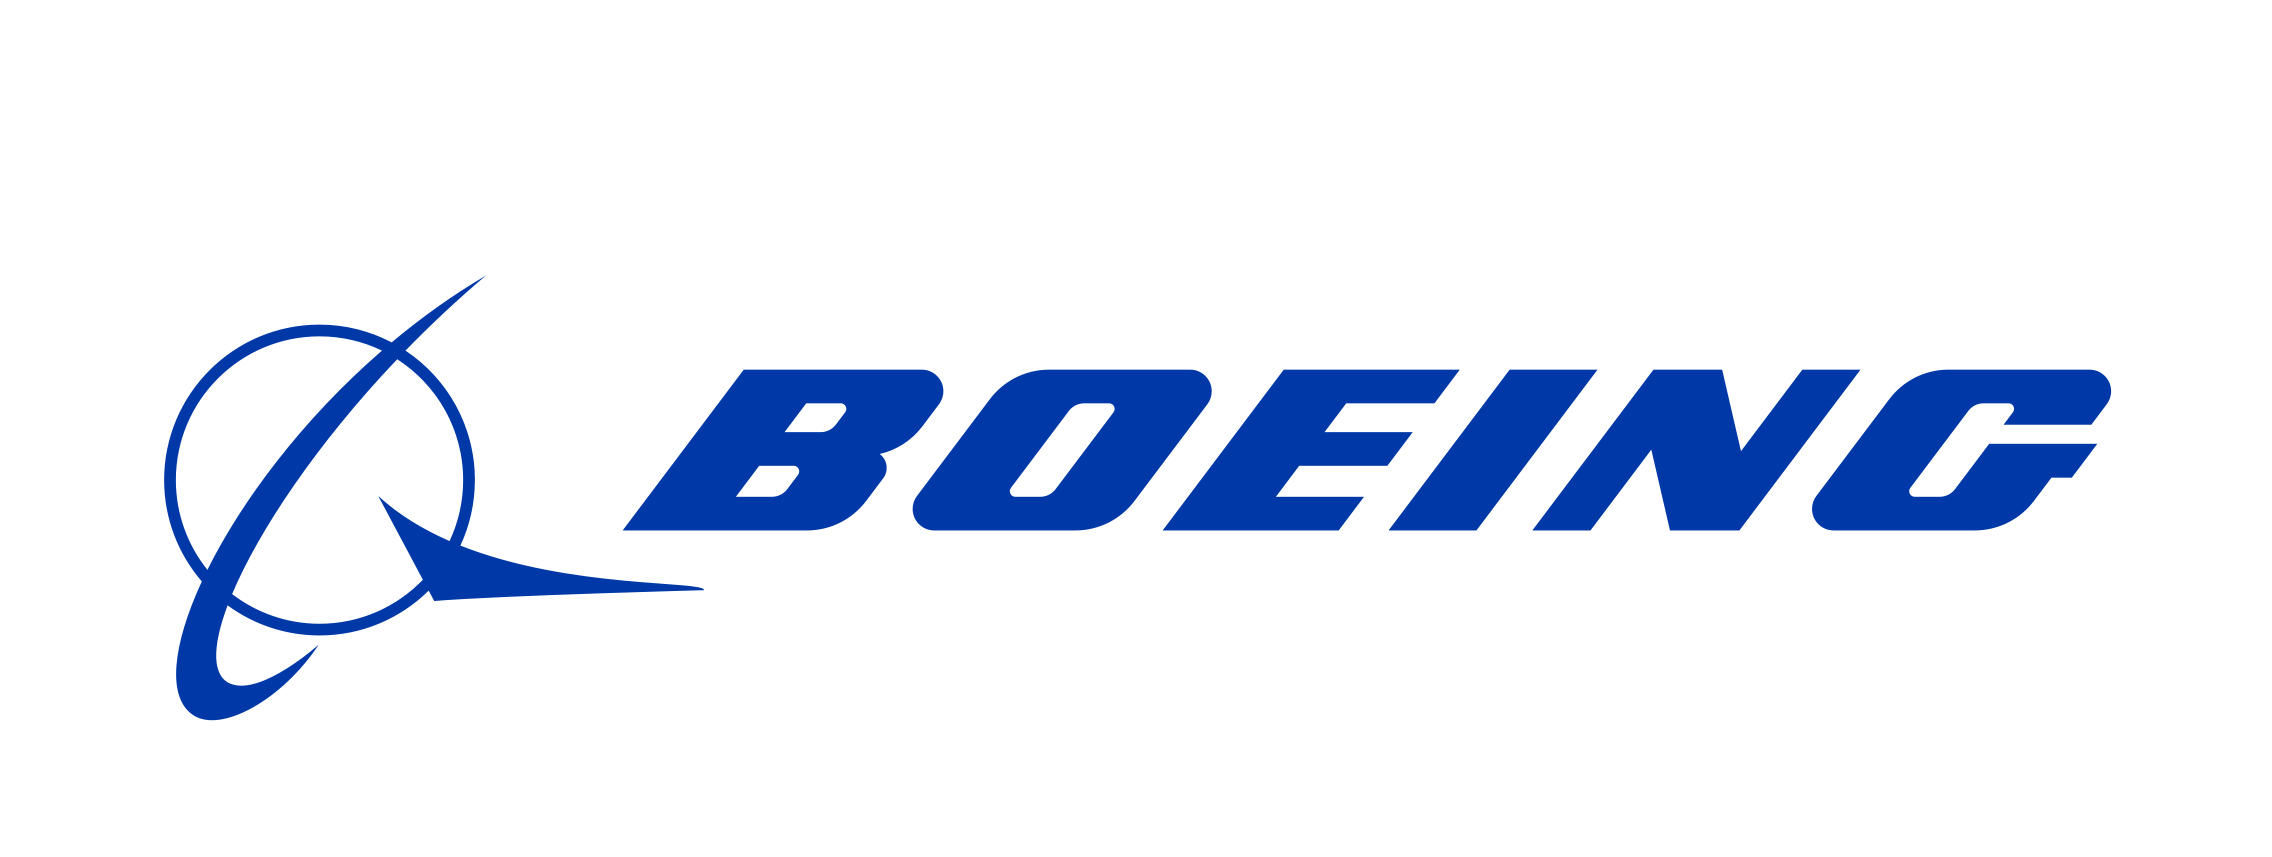 boeing mission and vision statement